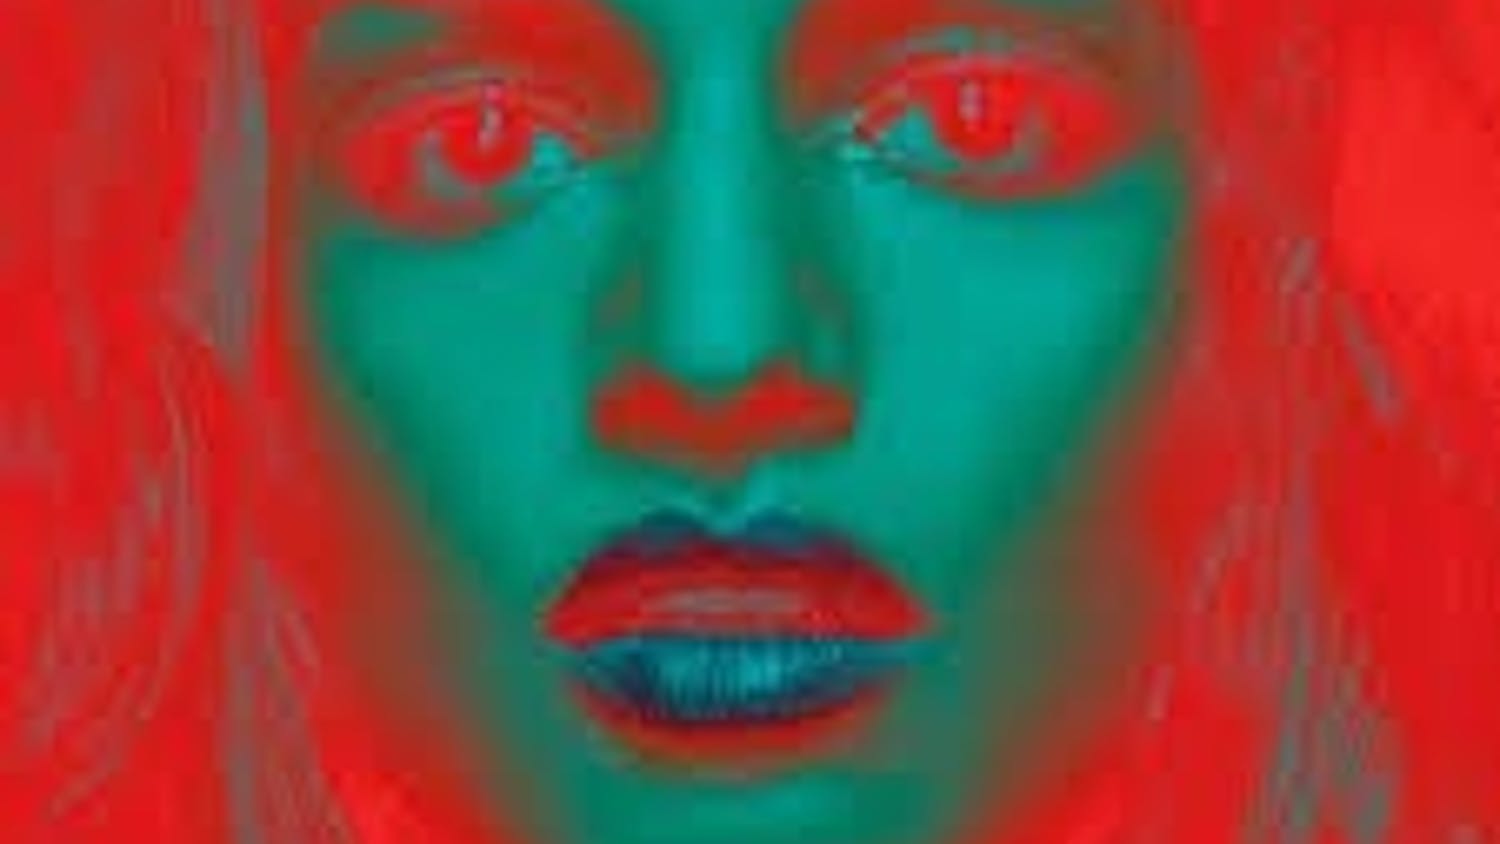 	M.I.A uses an eclectic mix of instruments and cultures in her latest album, &#8220;Matangi,&#8221; which drops today.